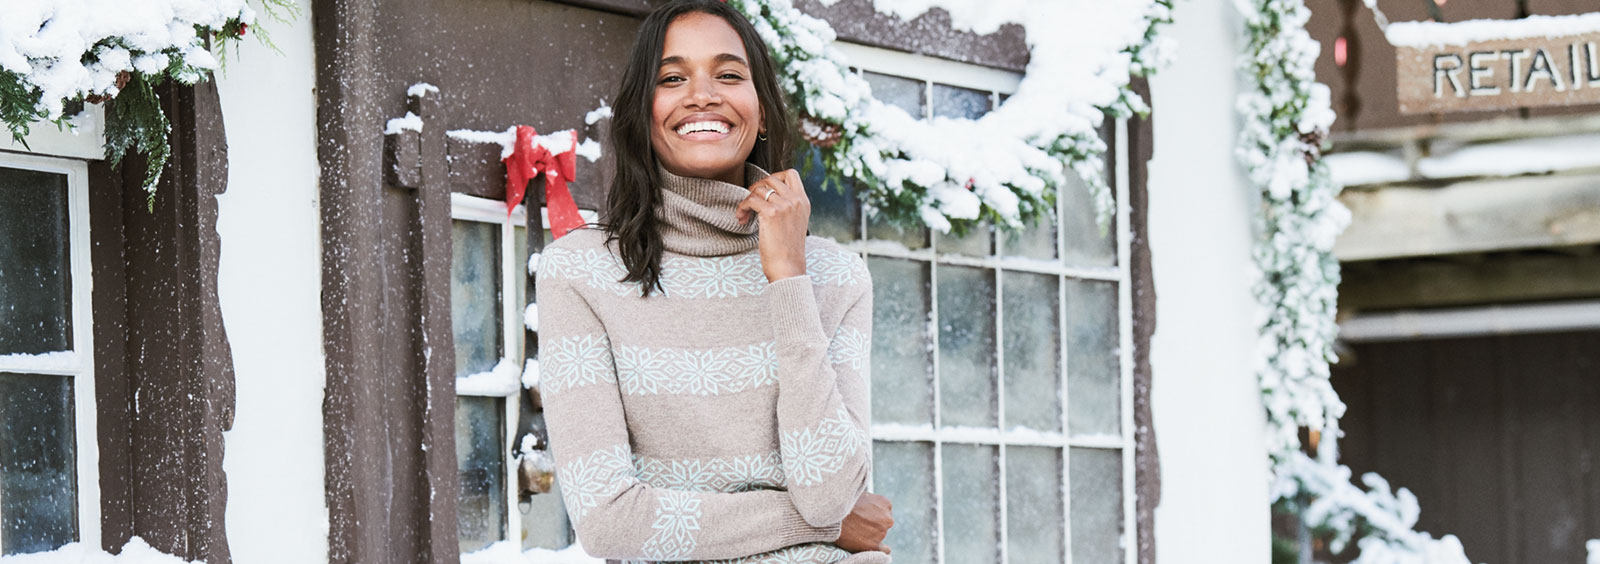 5 Reasons Why I Love Cozy Winter Sweaters